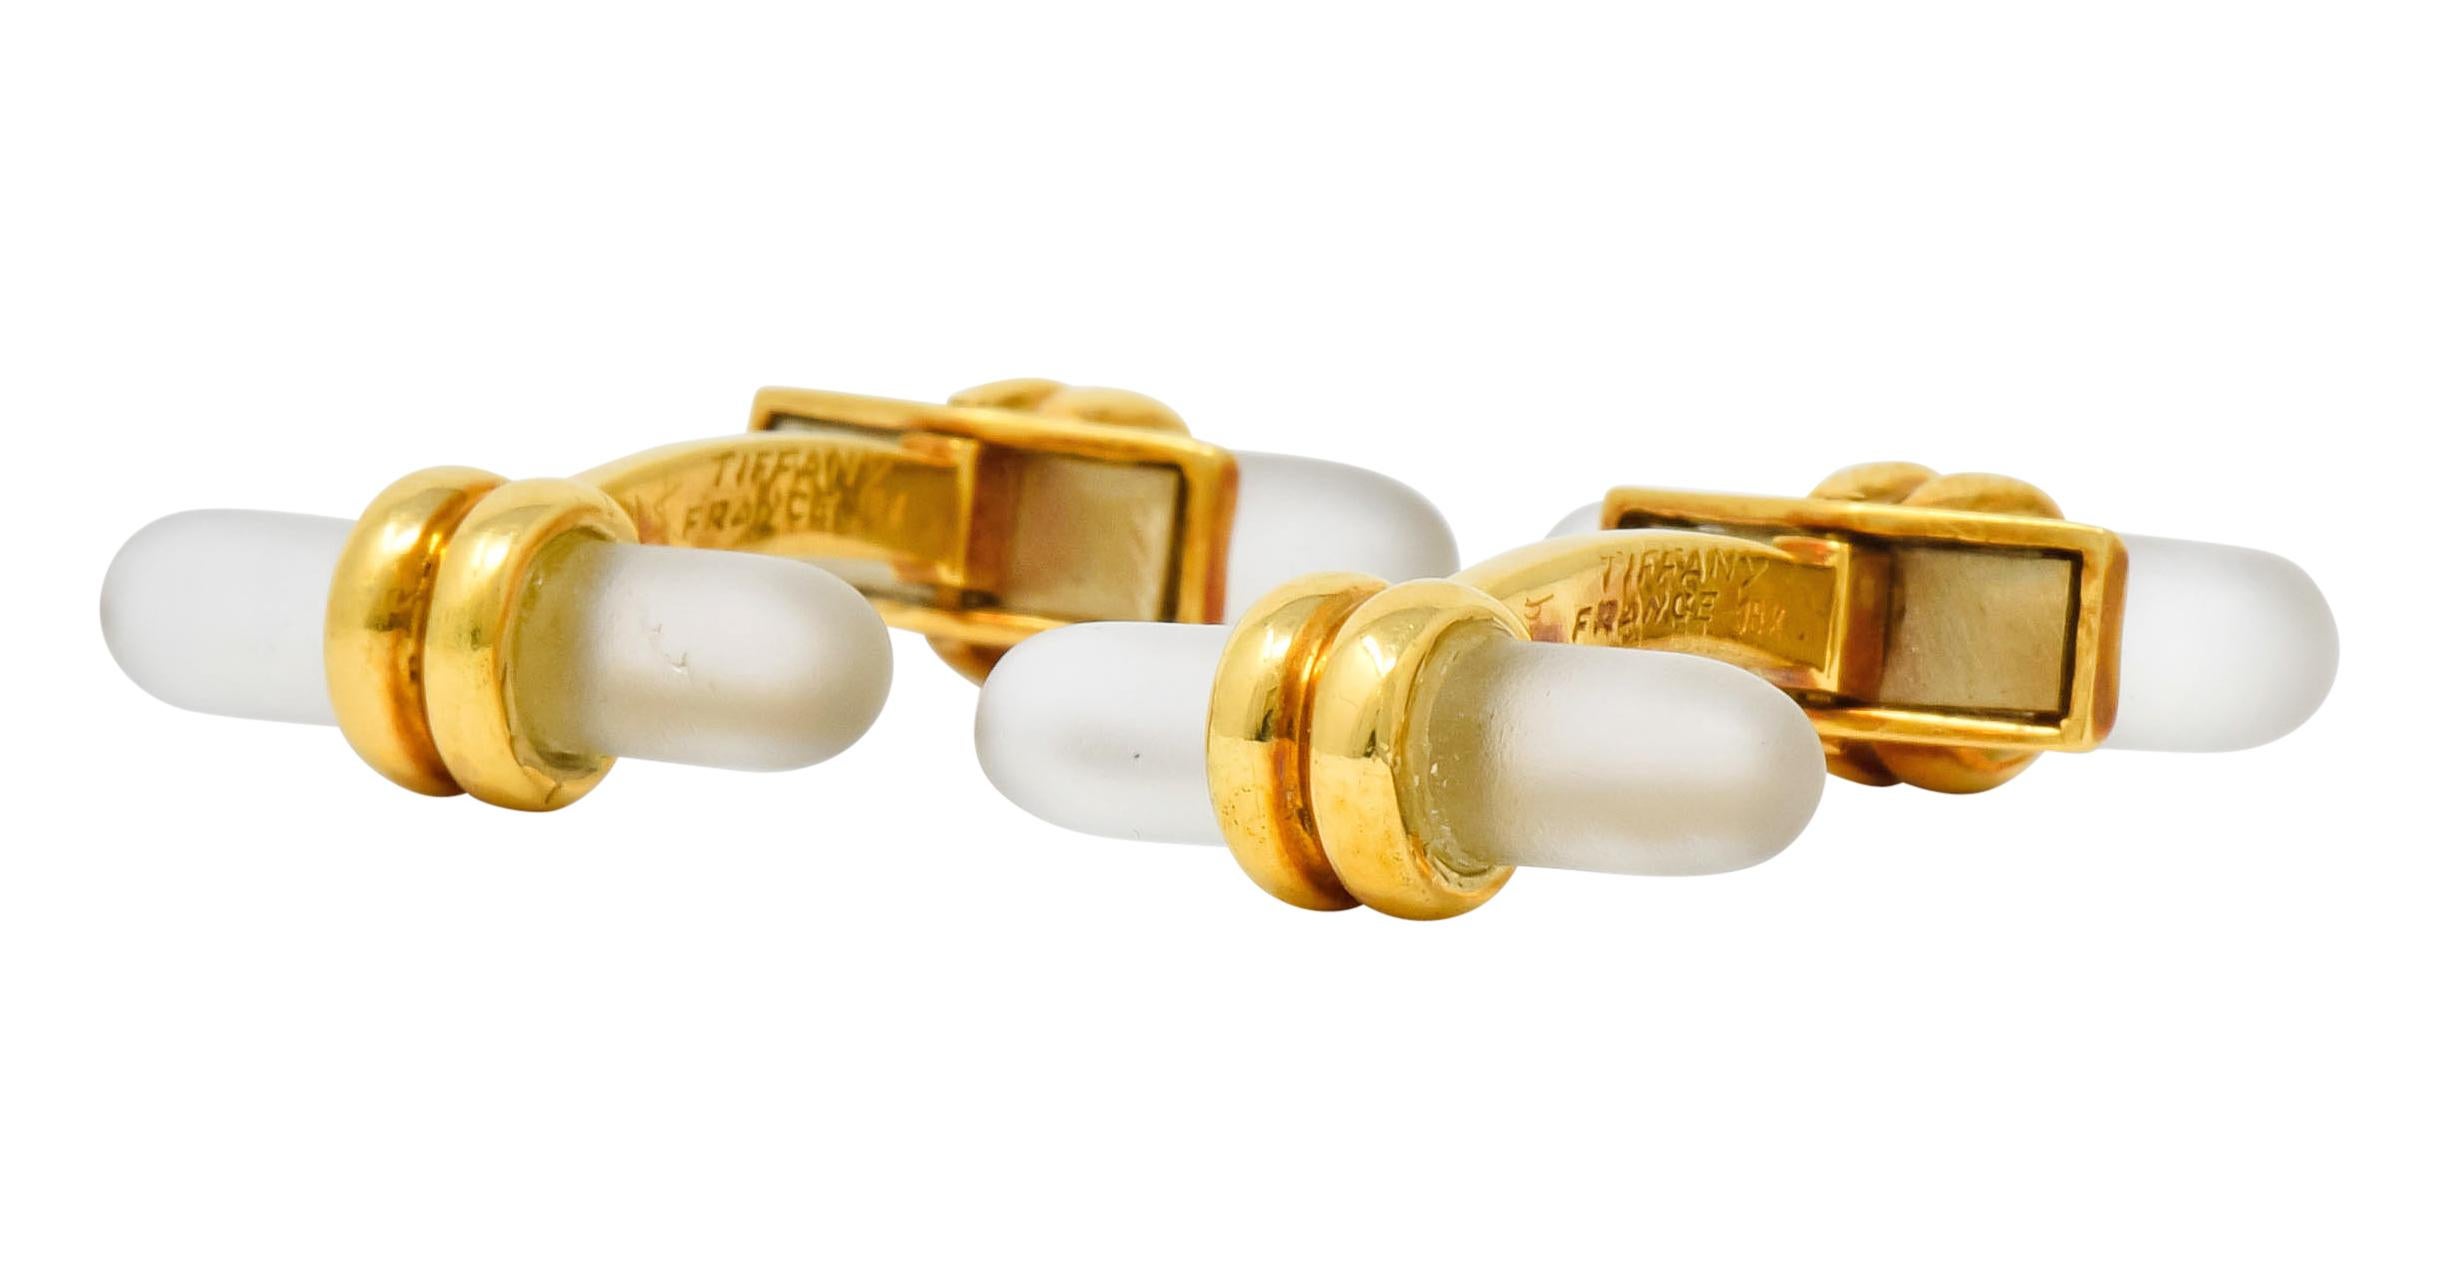 Lever style cufflinks terminating as two cylindrical rock crystal, translucent with a frosted finish

Each centrally wrapped by deeply ridged gold

Signed Tiffany France

Stamped 18k with French assay marks for 18 karat gold

Length: 1 1/8